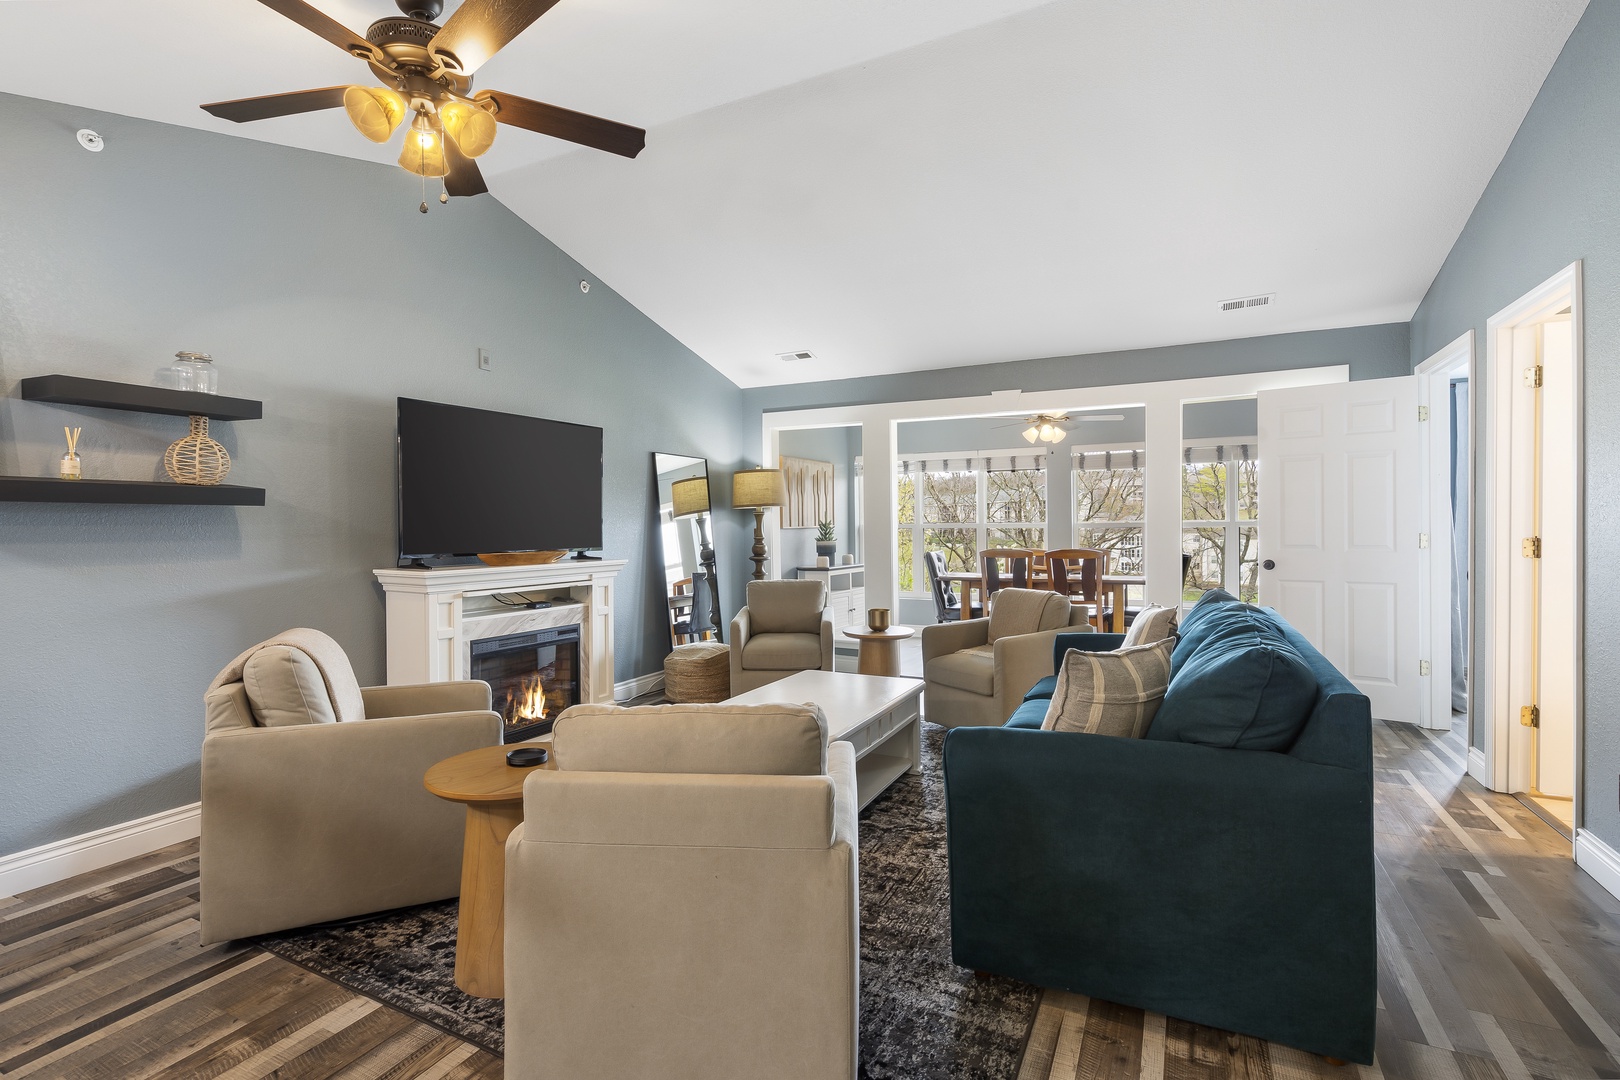 Curl up in the airy living room & enjoy a movie night by the electric fireplace